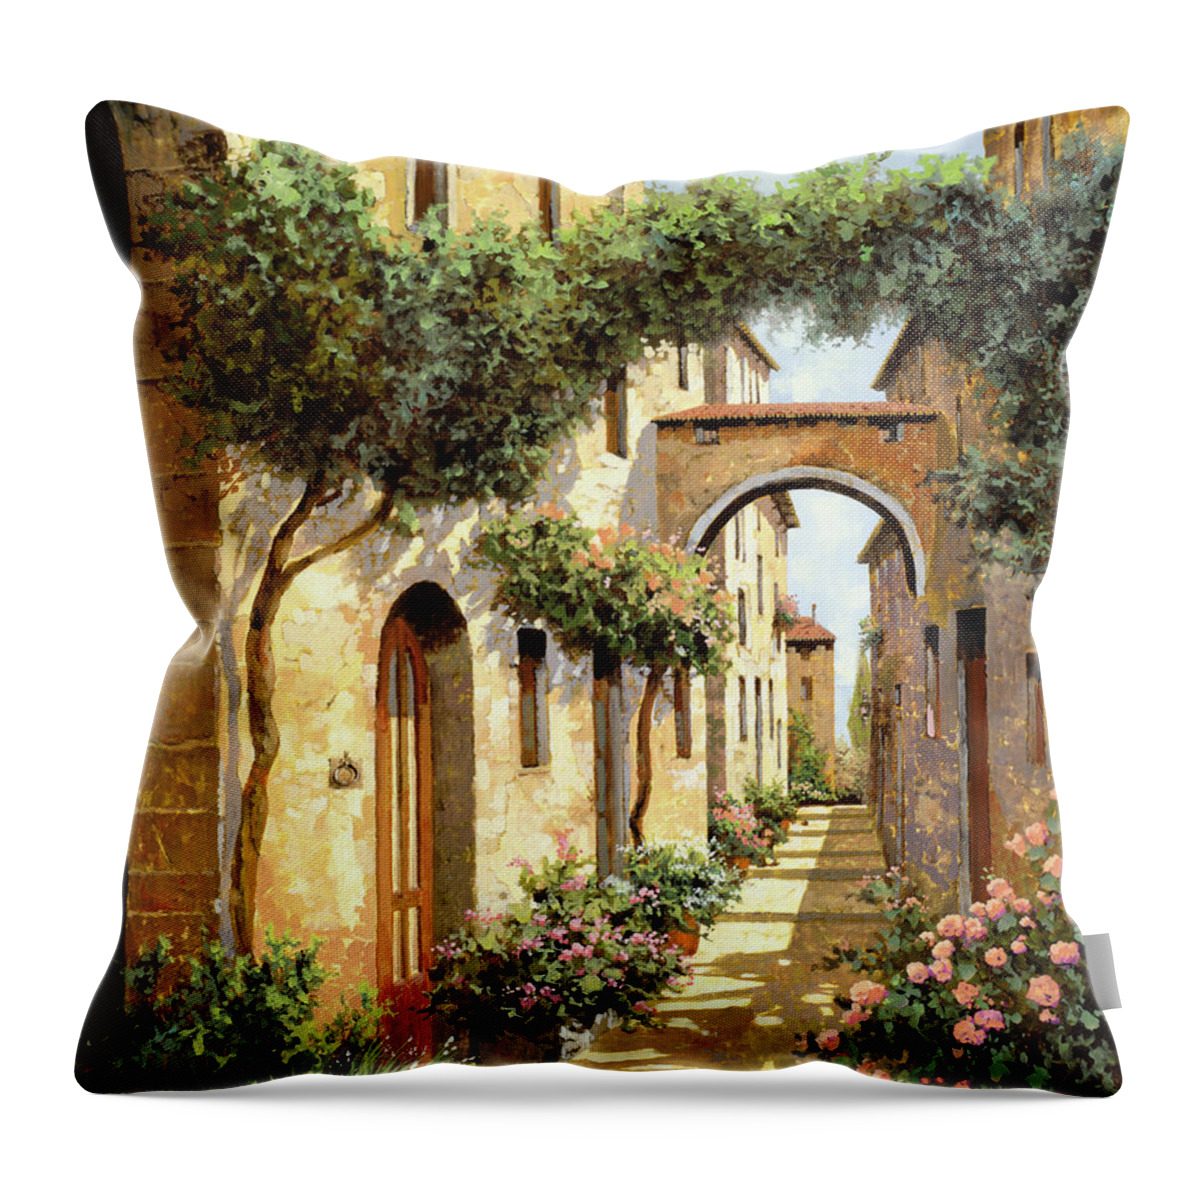 Landscape Throw Pillow featuring the painting Passando Sotto L'arco by Guido Borelli